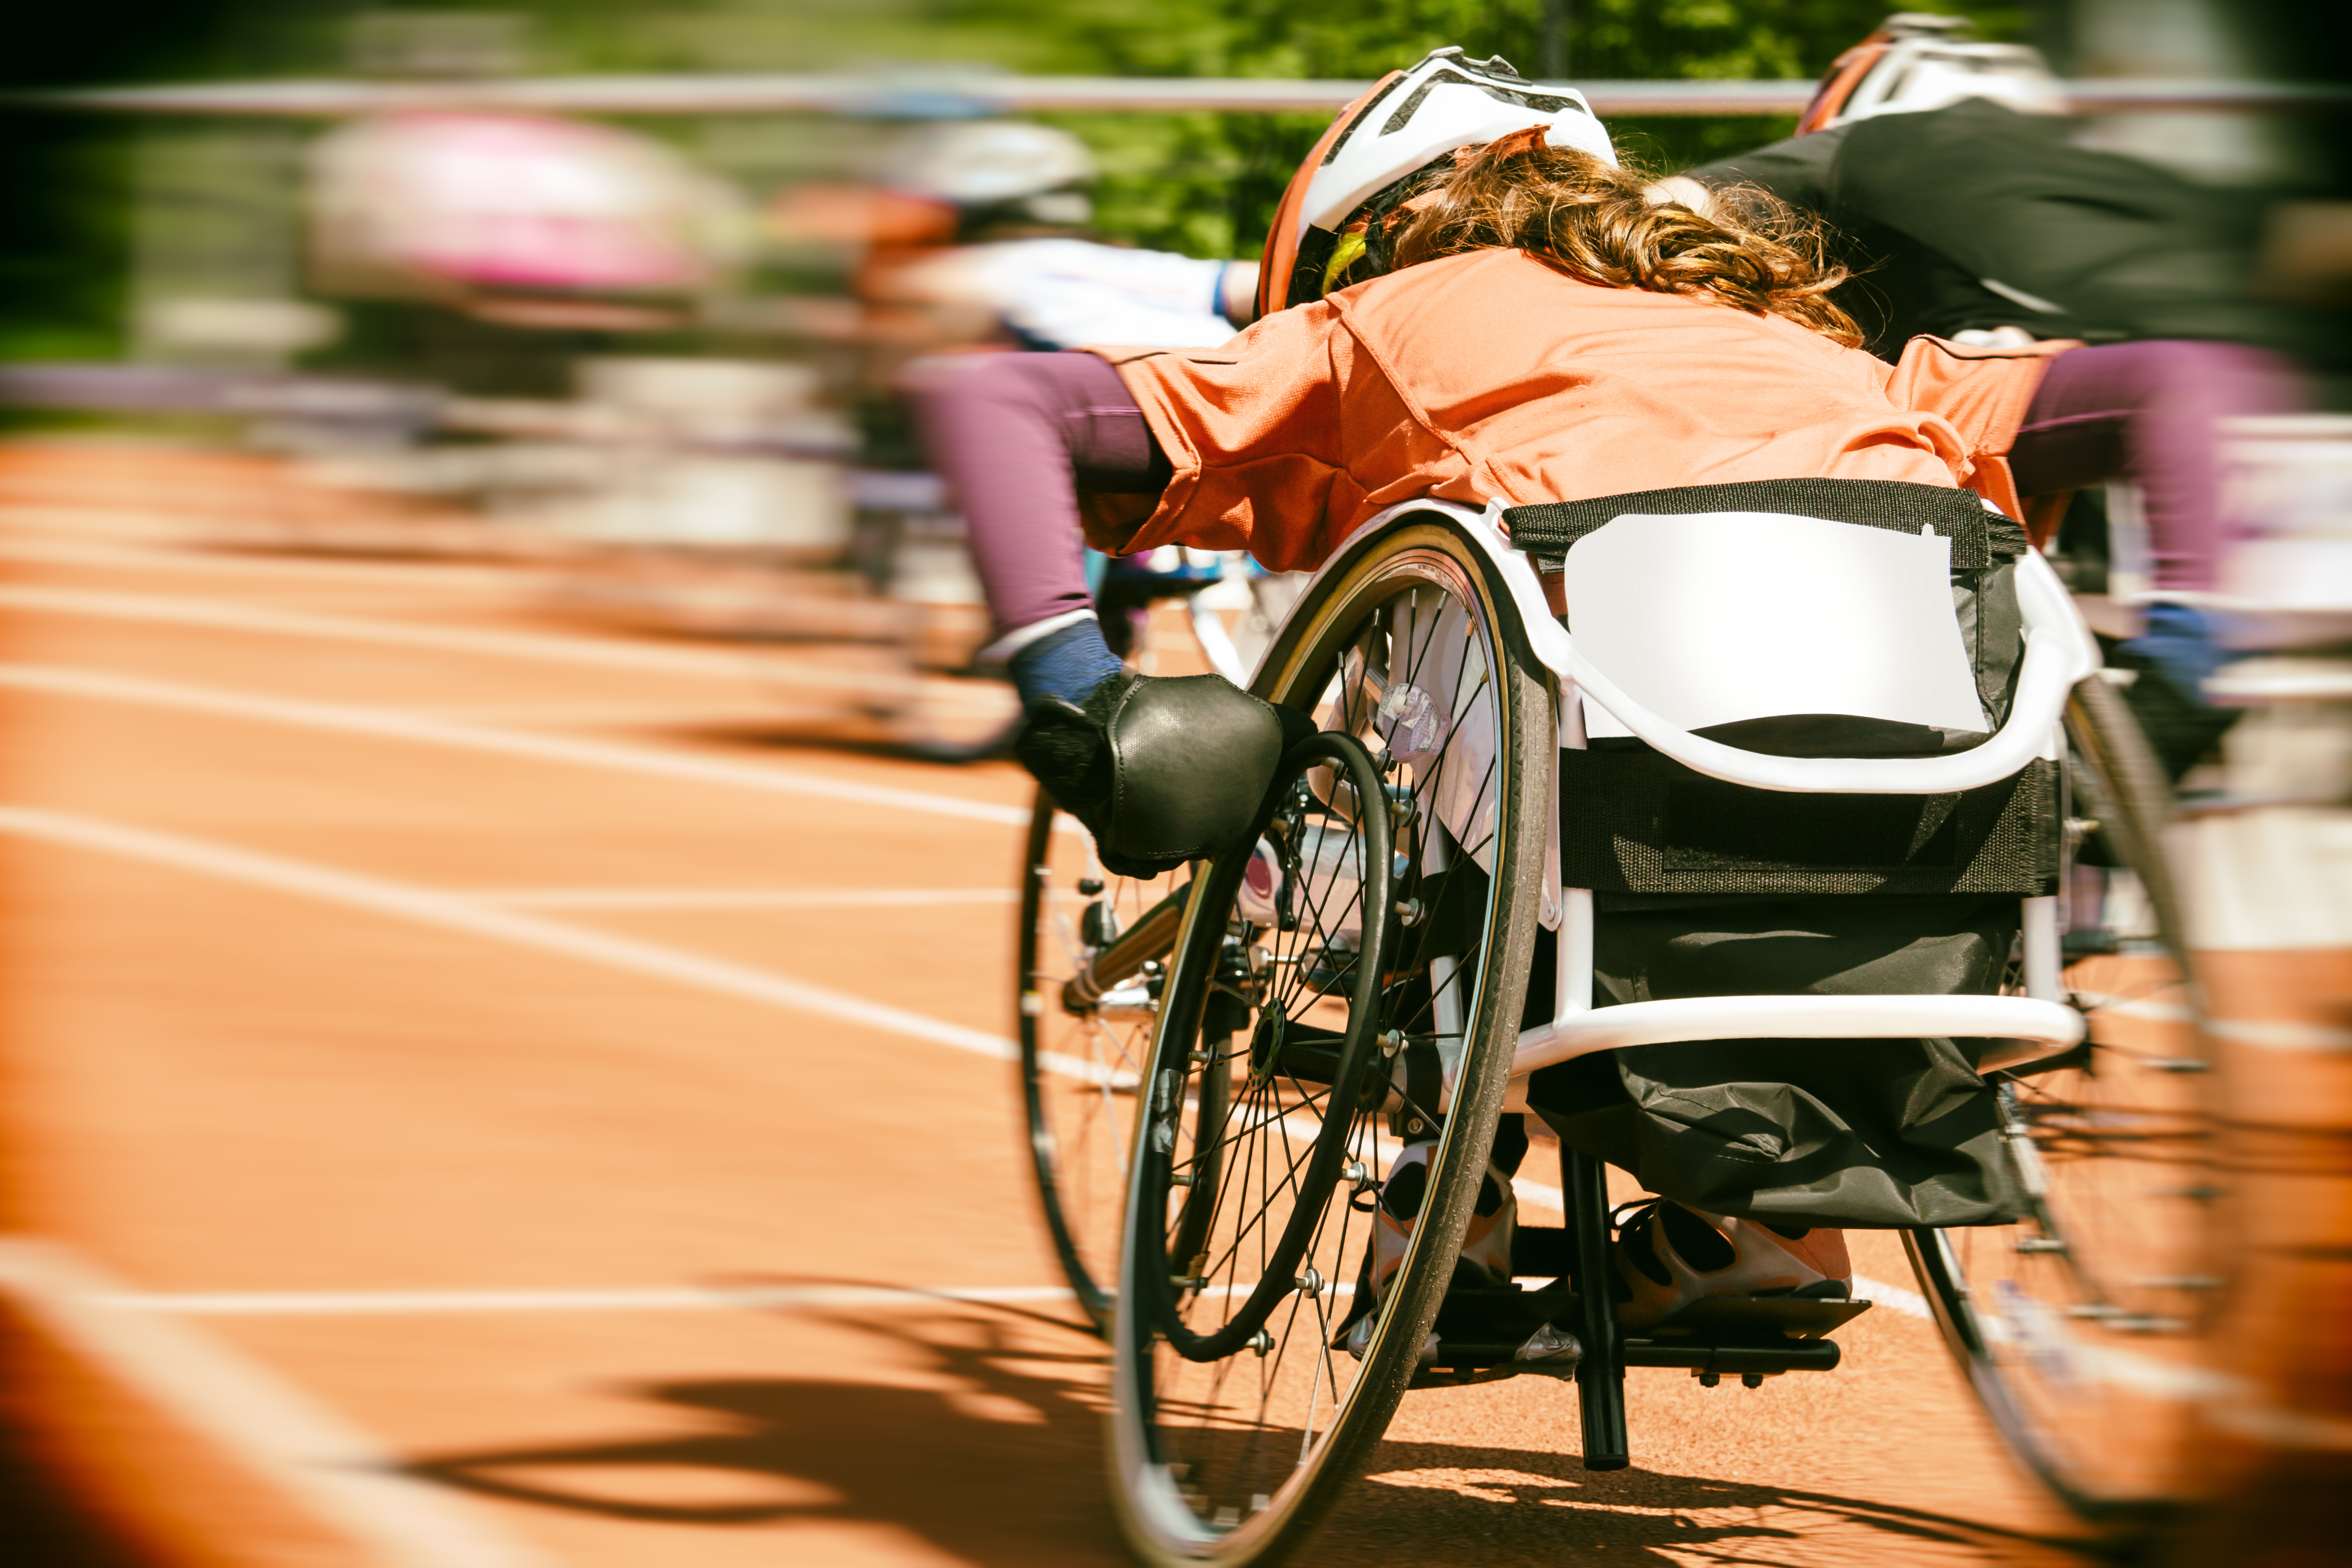 Wheelchair user racing in an event